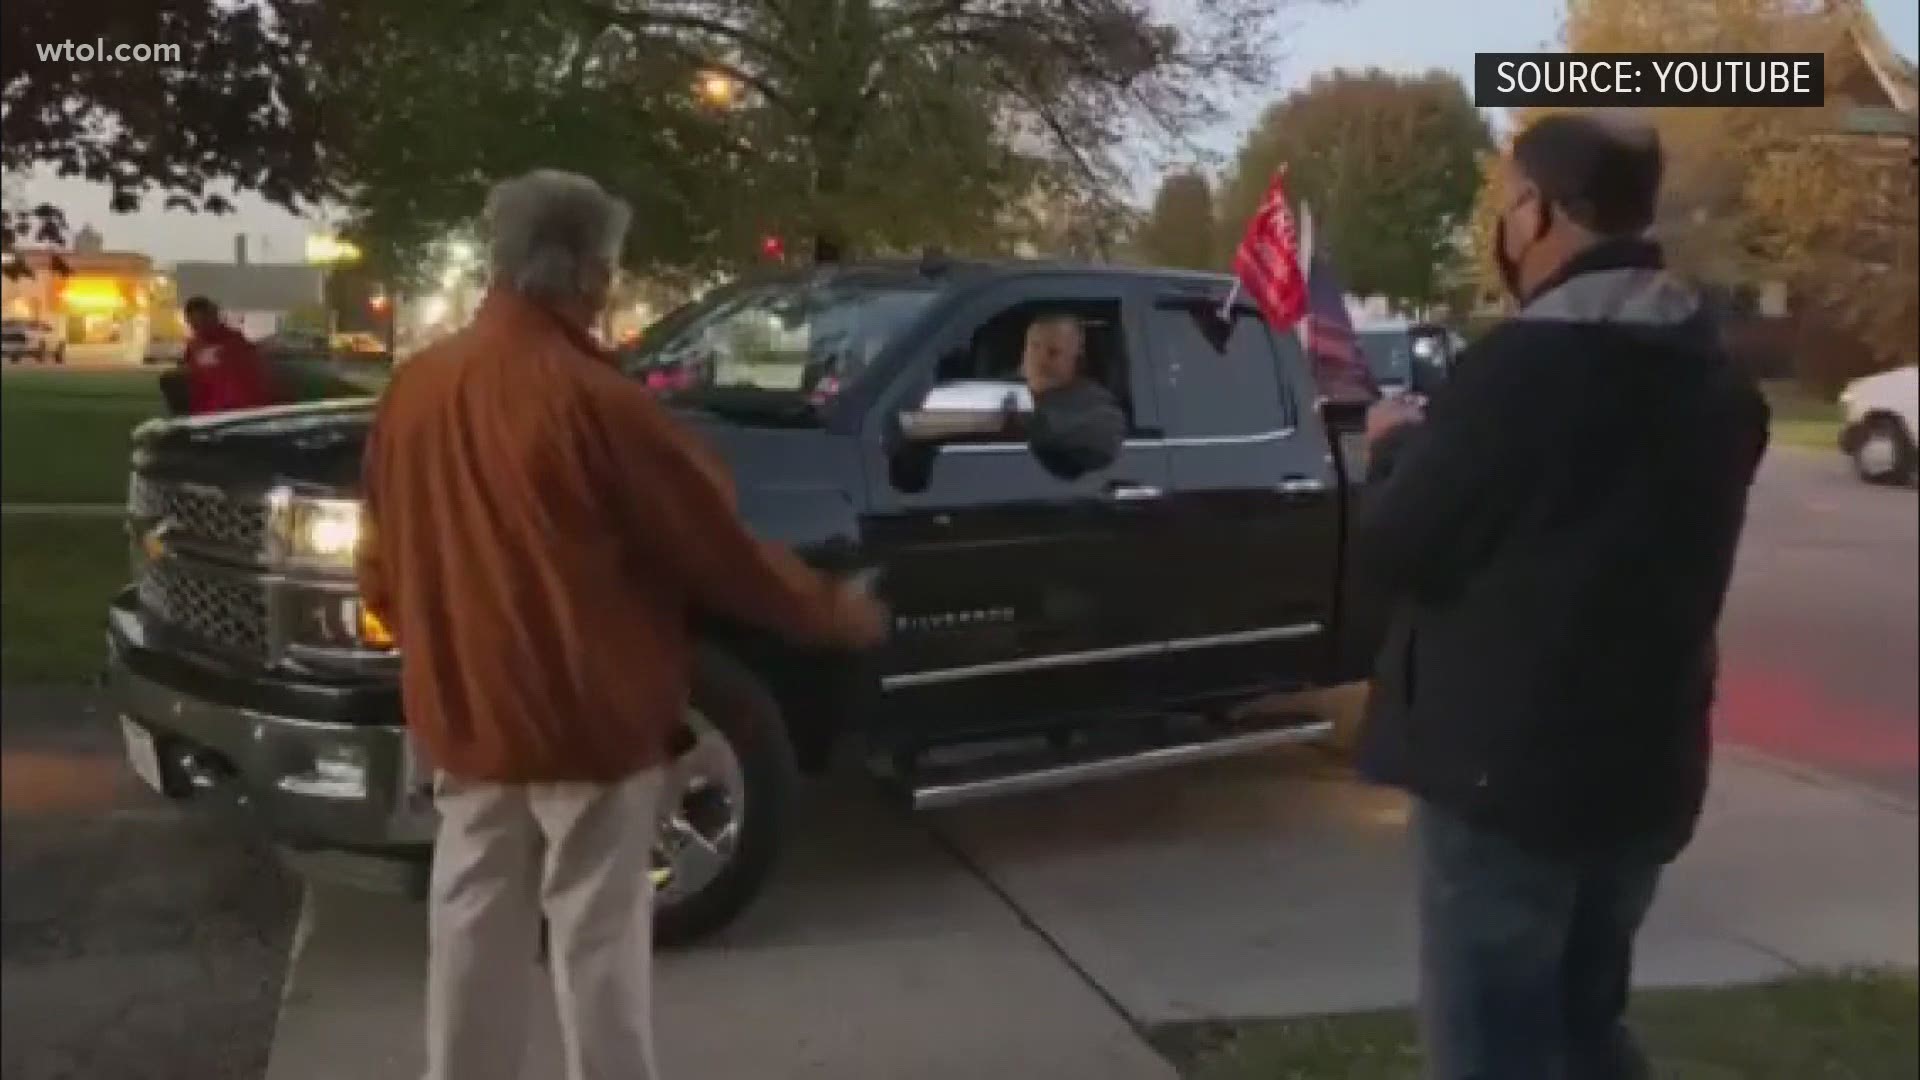 Video shows confrontation between truck driver and volunteer poll workers.